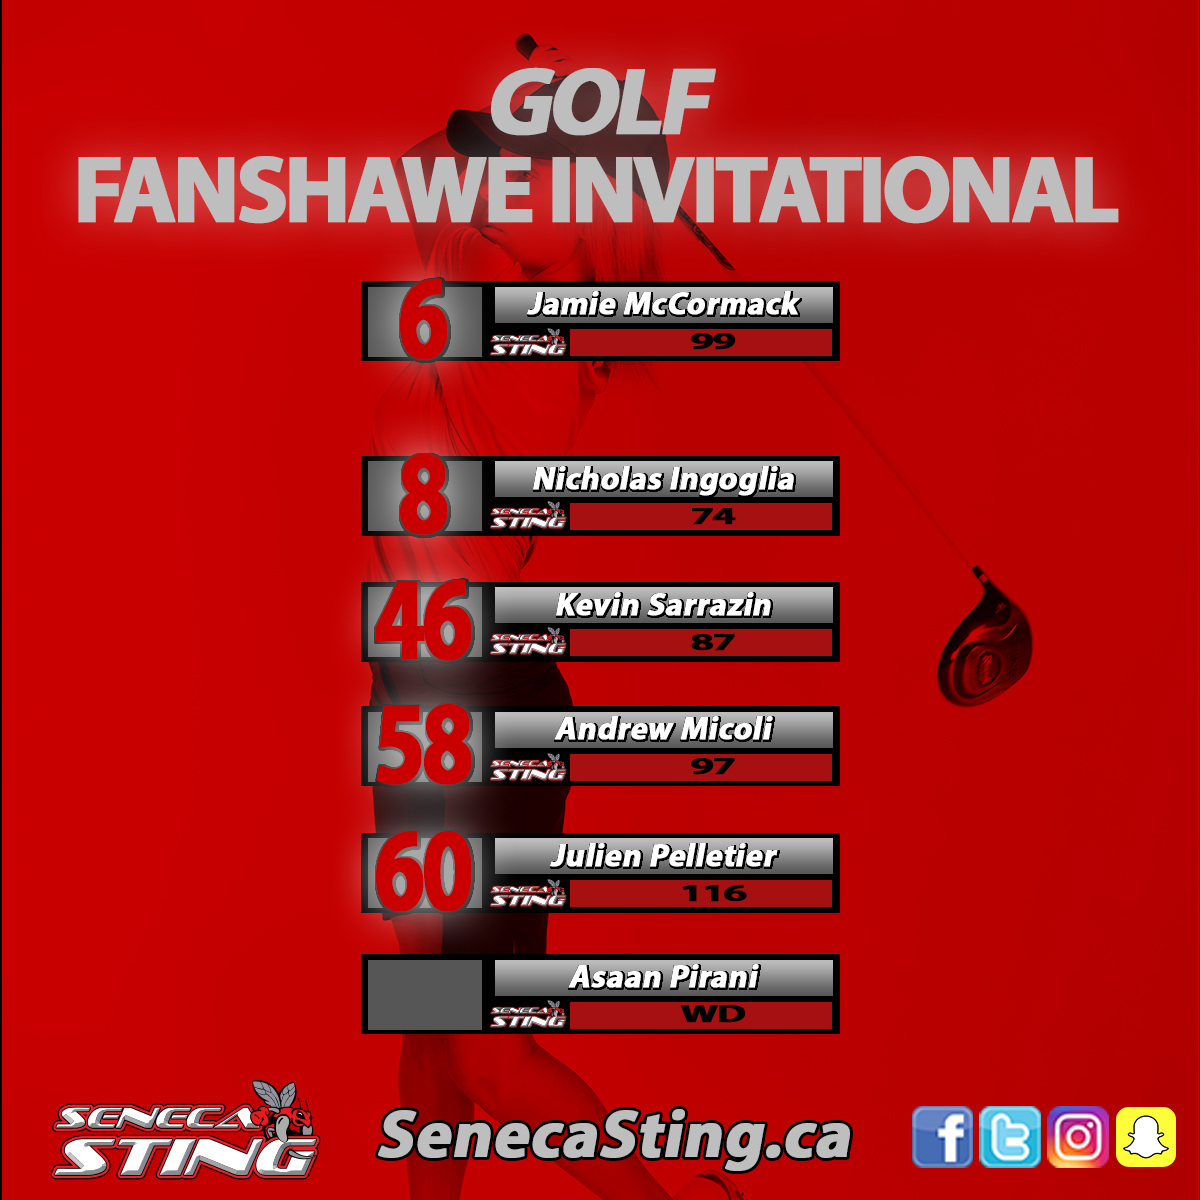 Results for Fanshawe Invitational